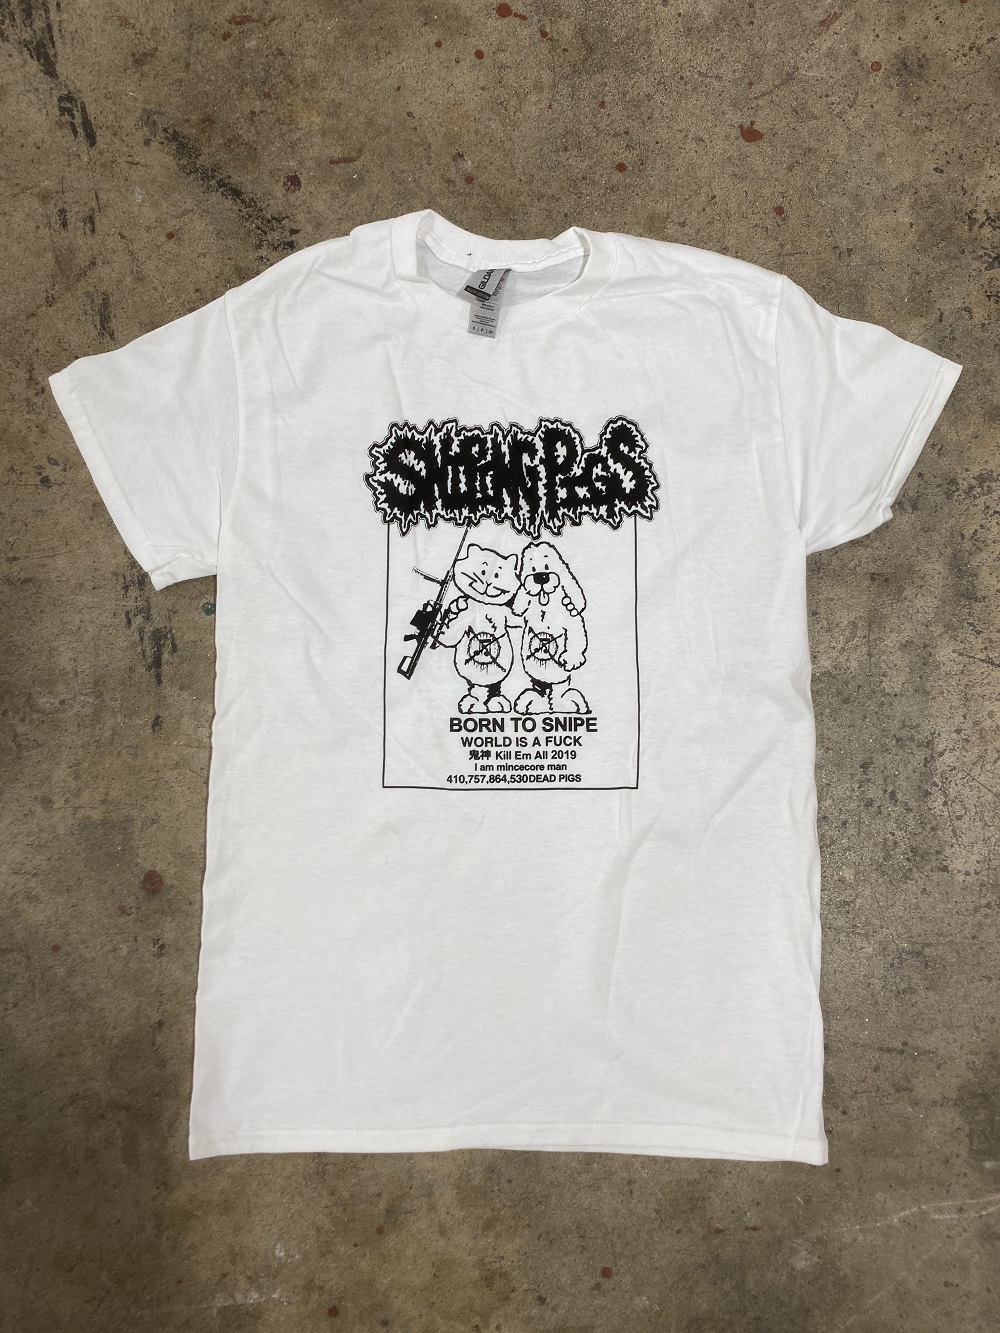 Sniping Pigs - Born To Snipe Shirt (LARGE)